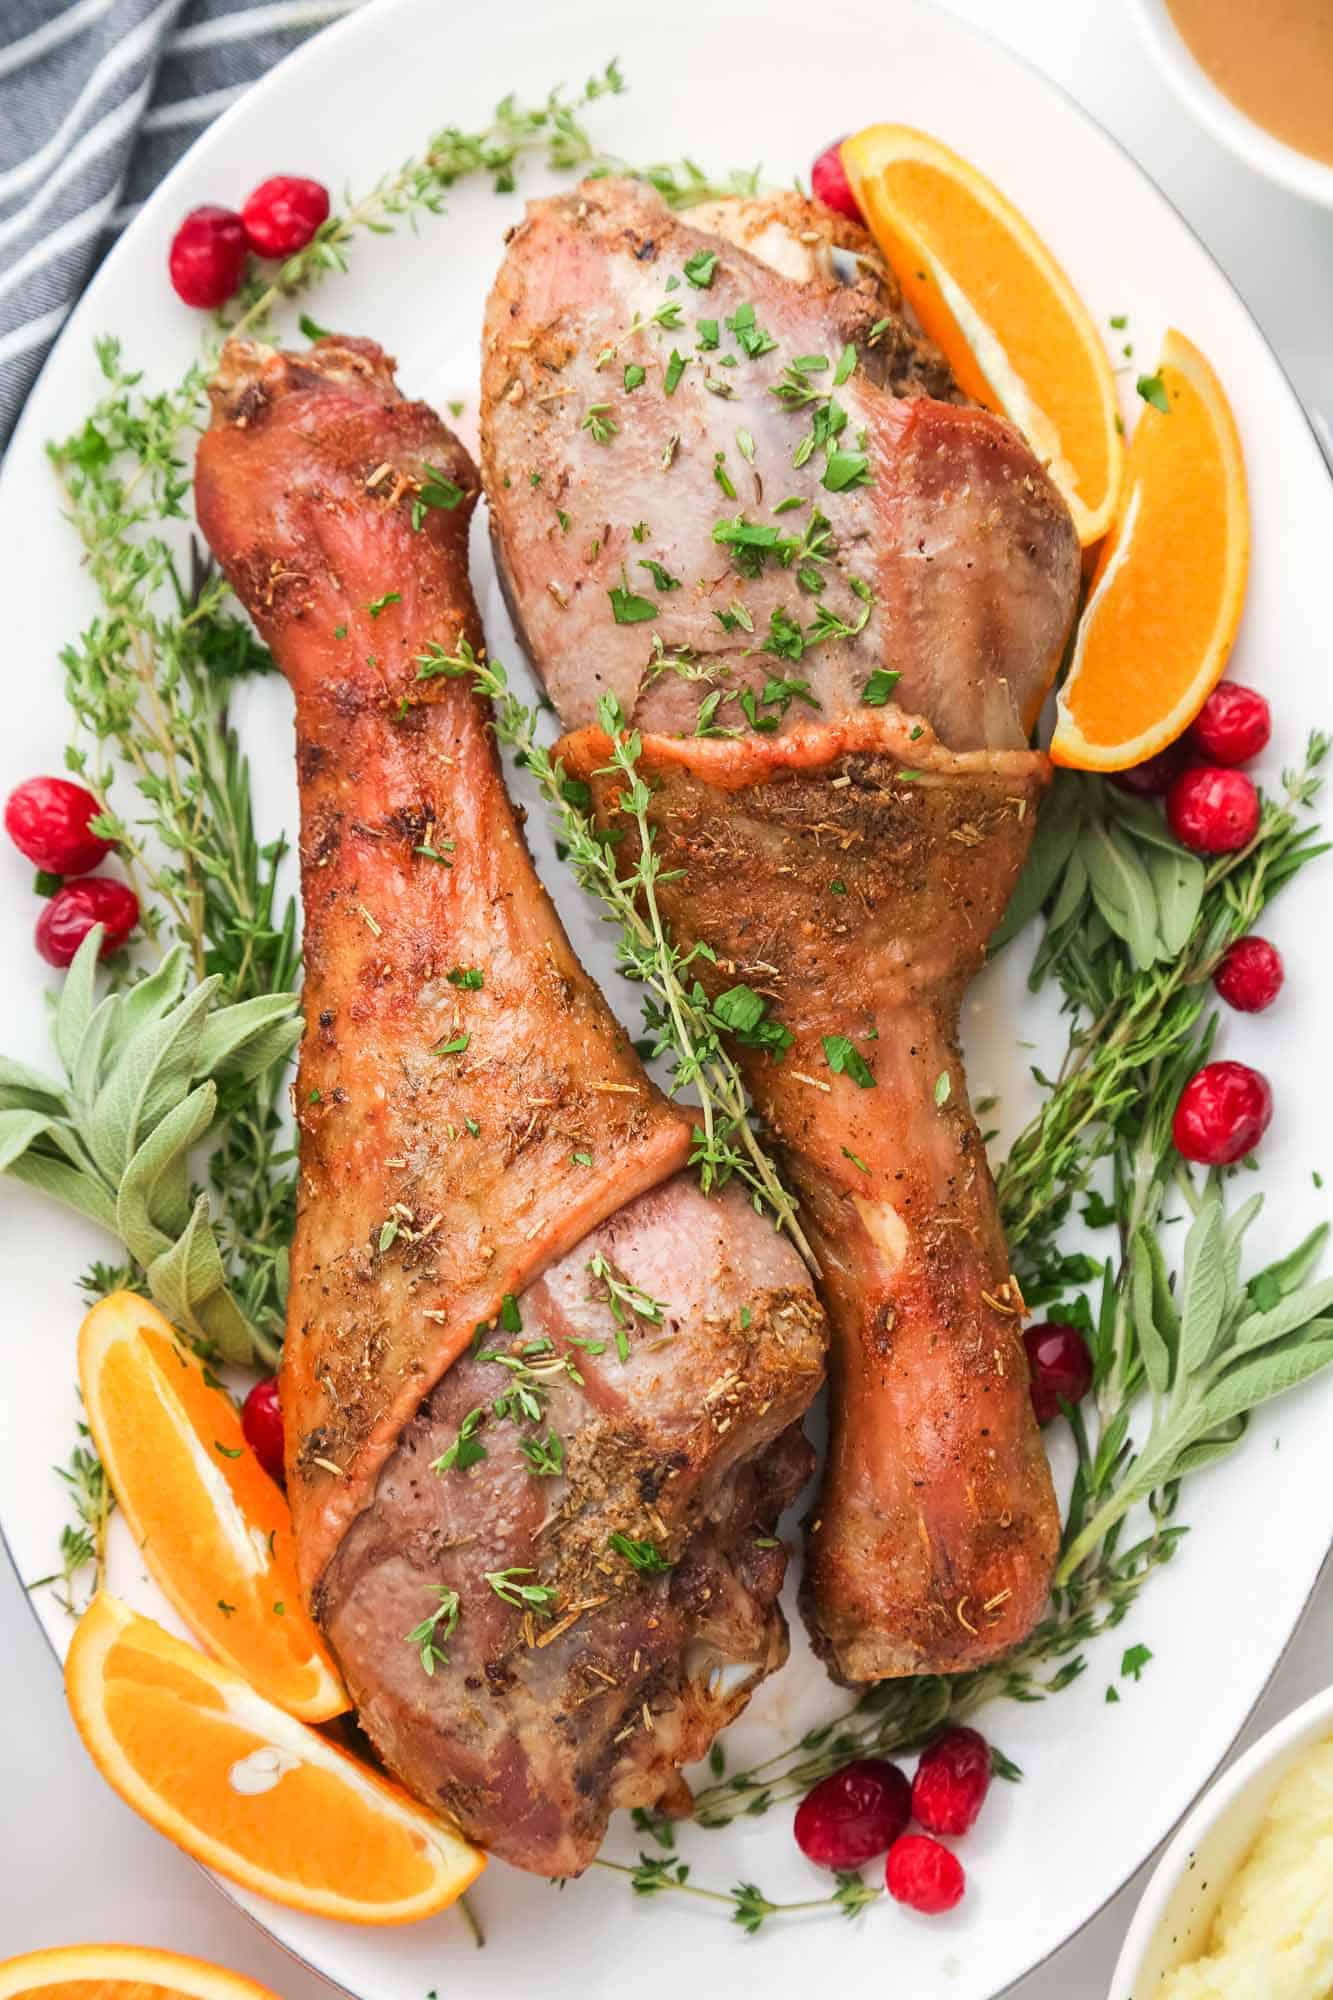 Two large roasted turkey legs on a platter, surrounded by cranberries, fresh herbs, and orange wedges.